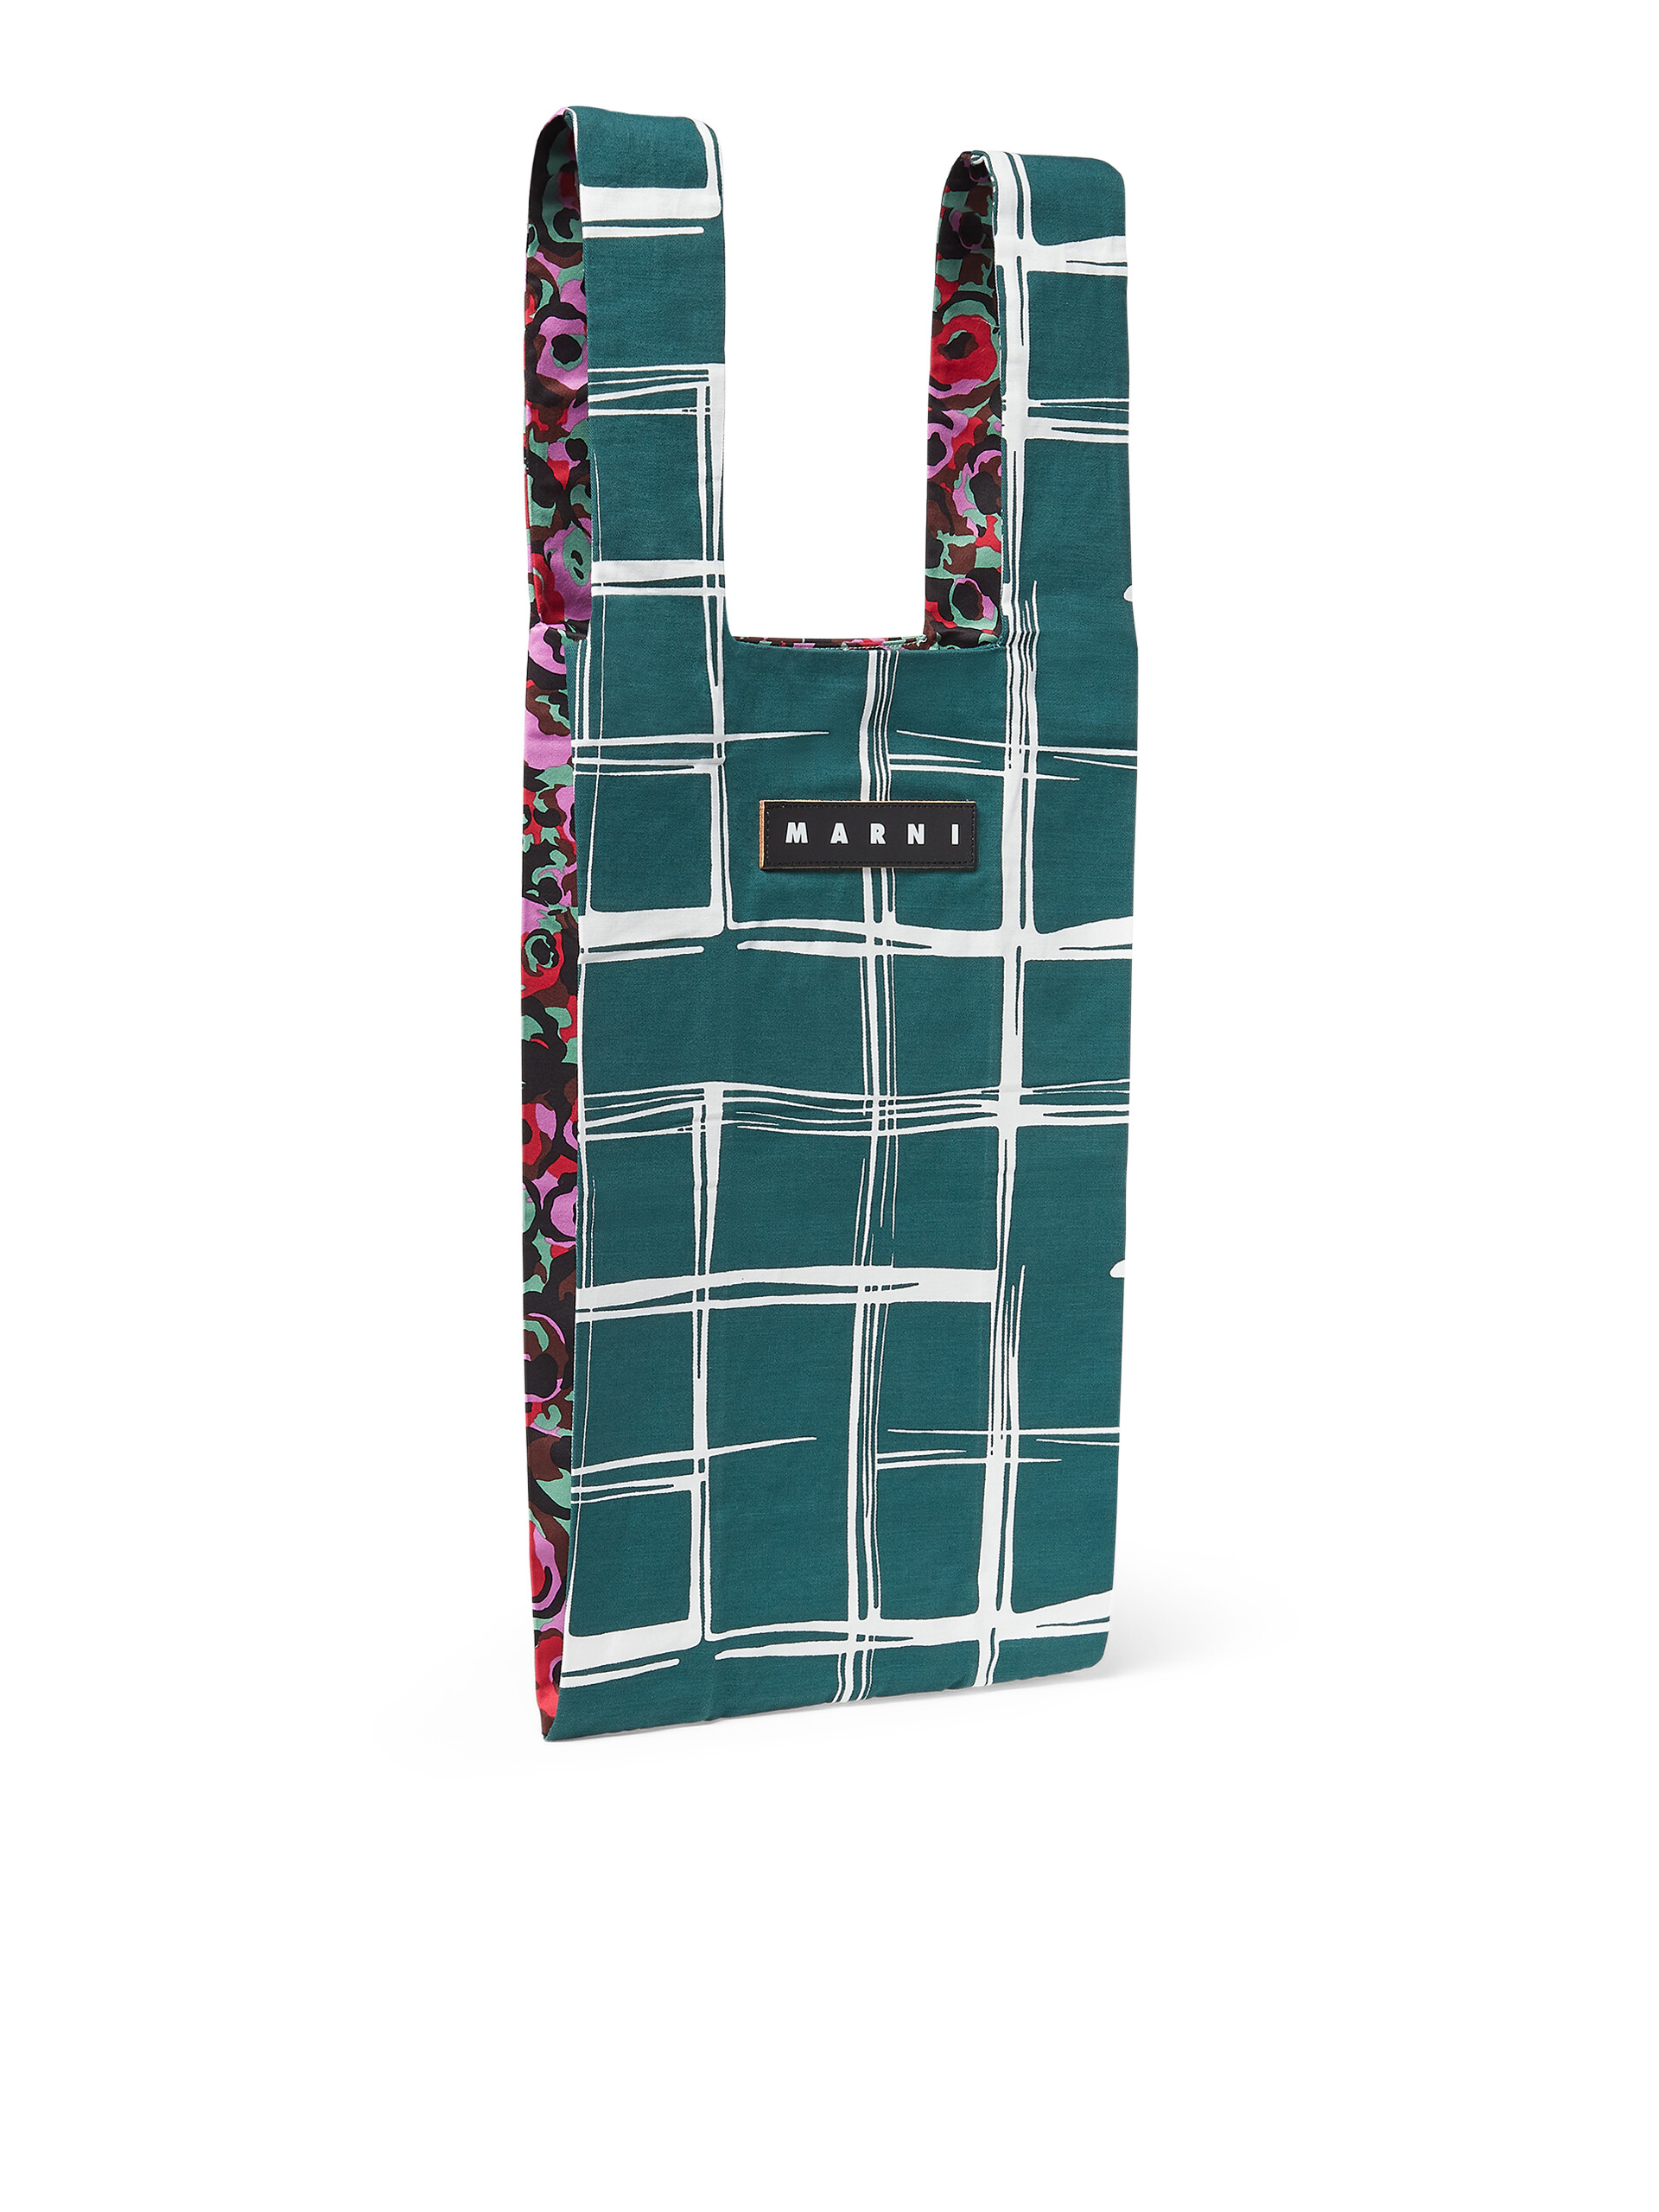 MARNI MARKET cotton shopping bag with check and floral print - Shopping Bags - Image 2